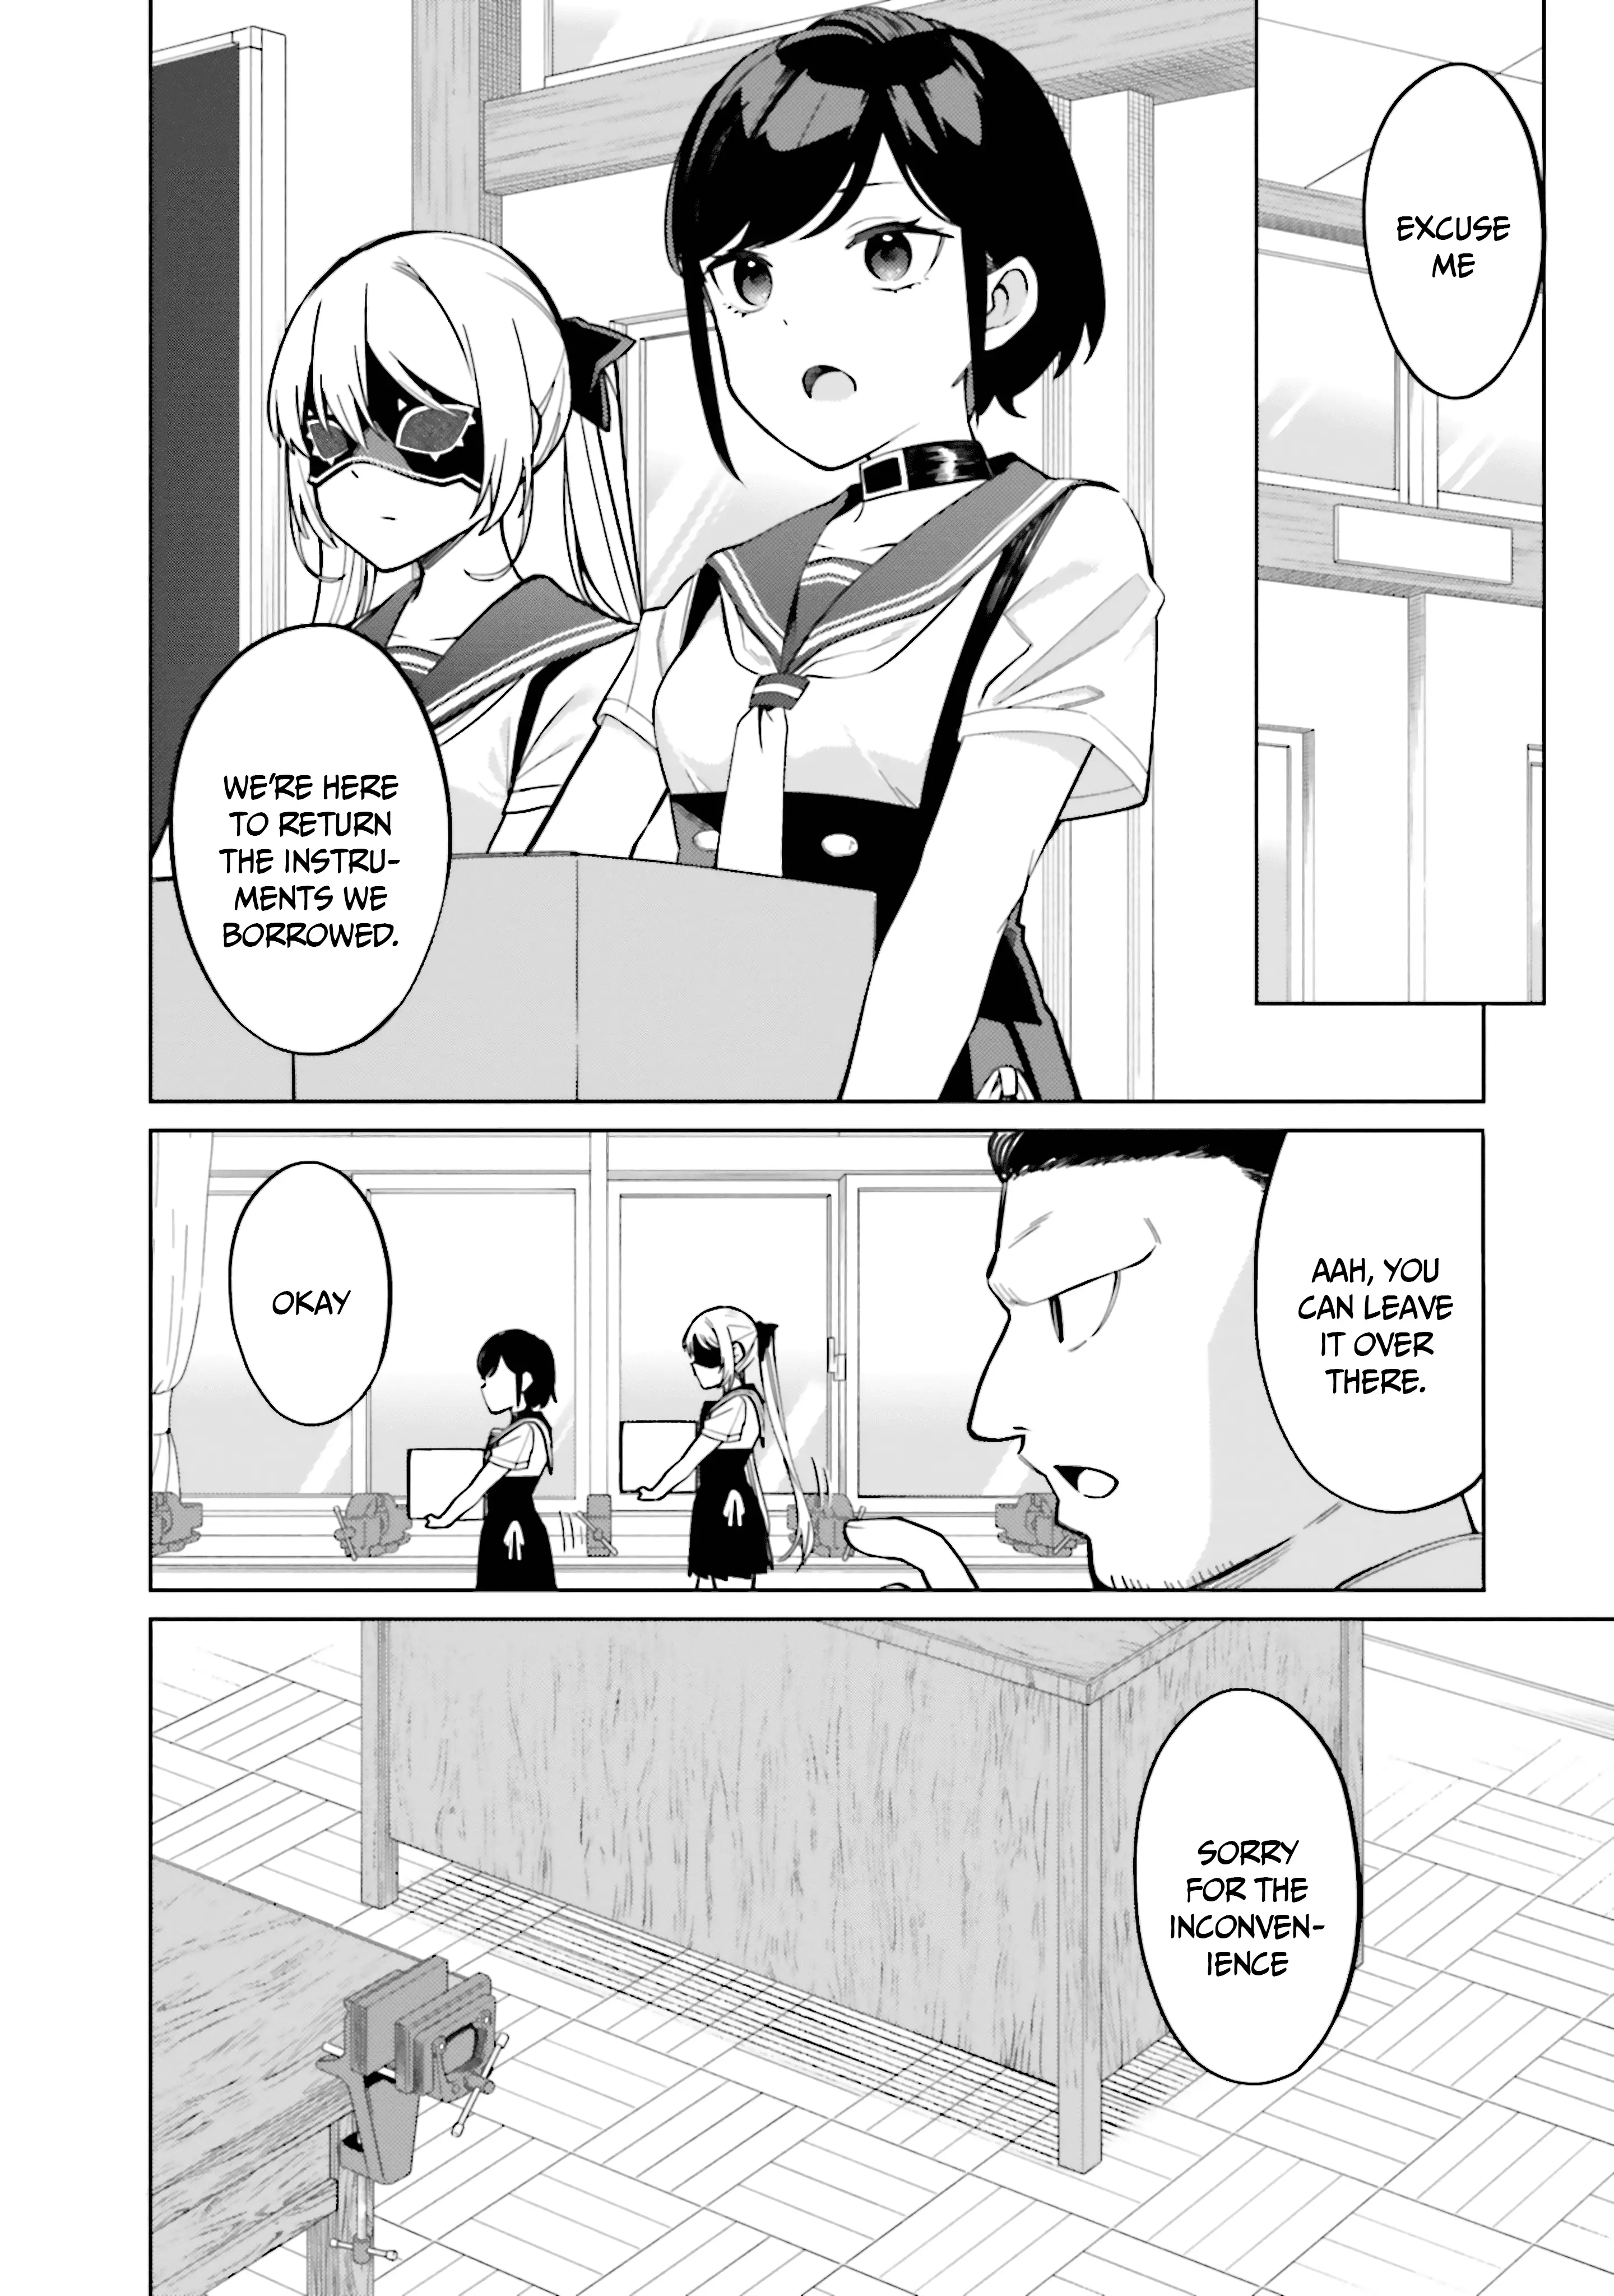 I Don't Understand Shirogane-San's Facial Expression At All - 14 page 13-0a75dc65